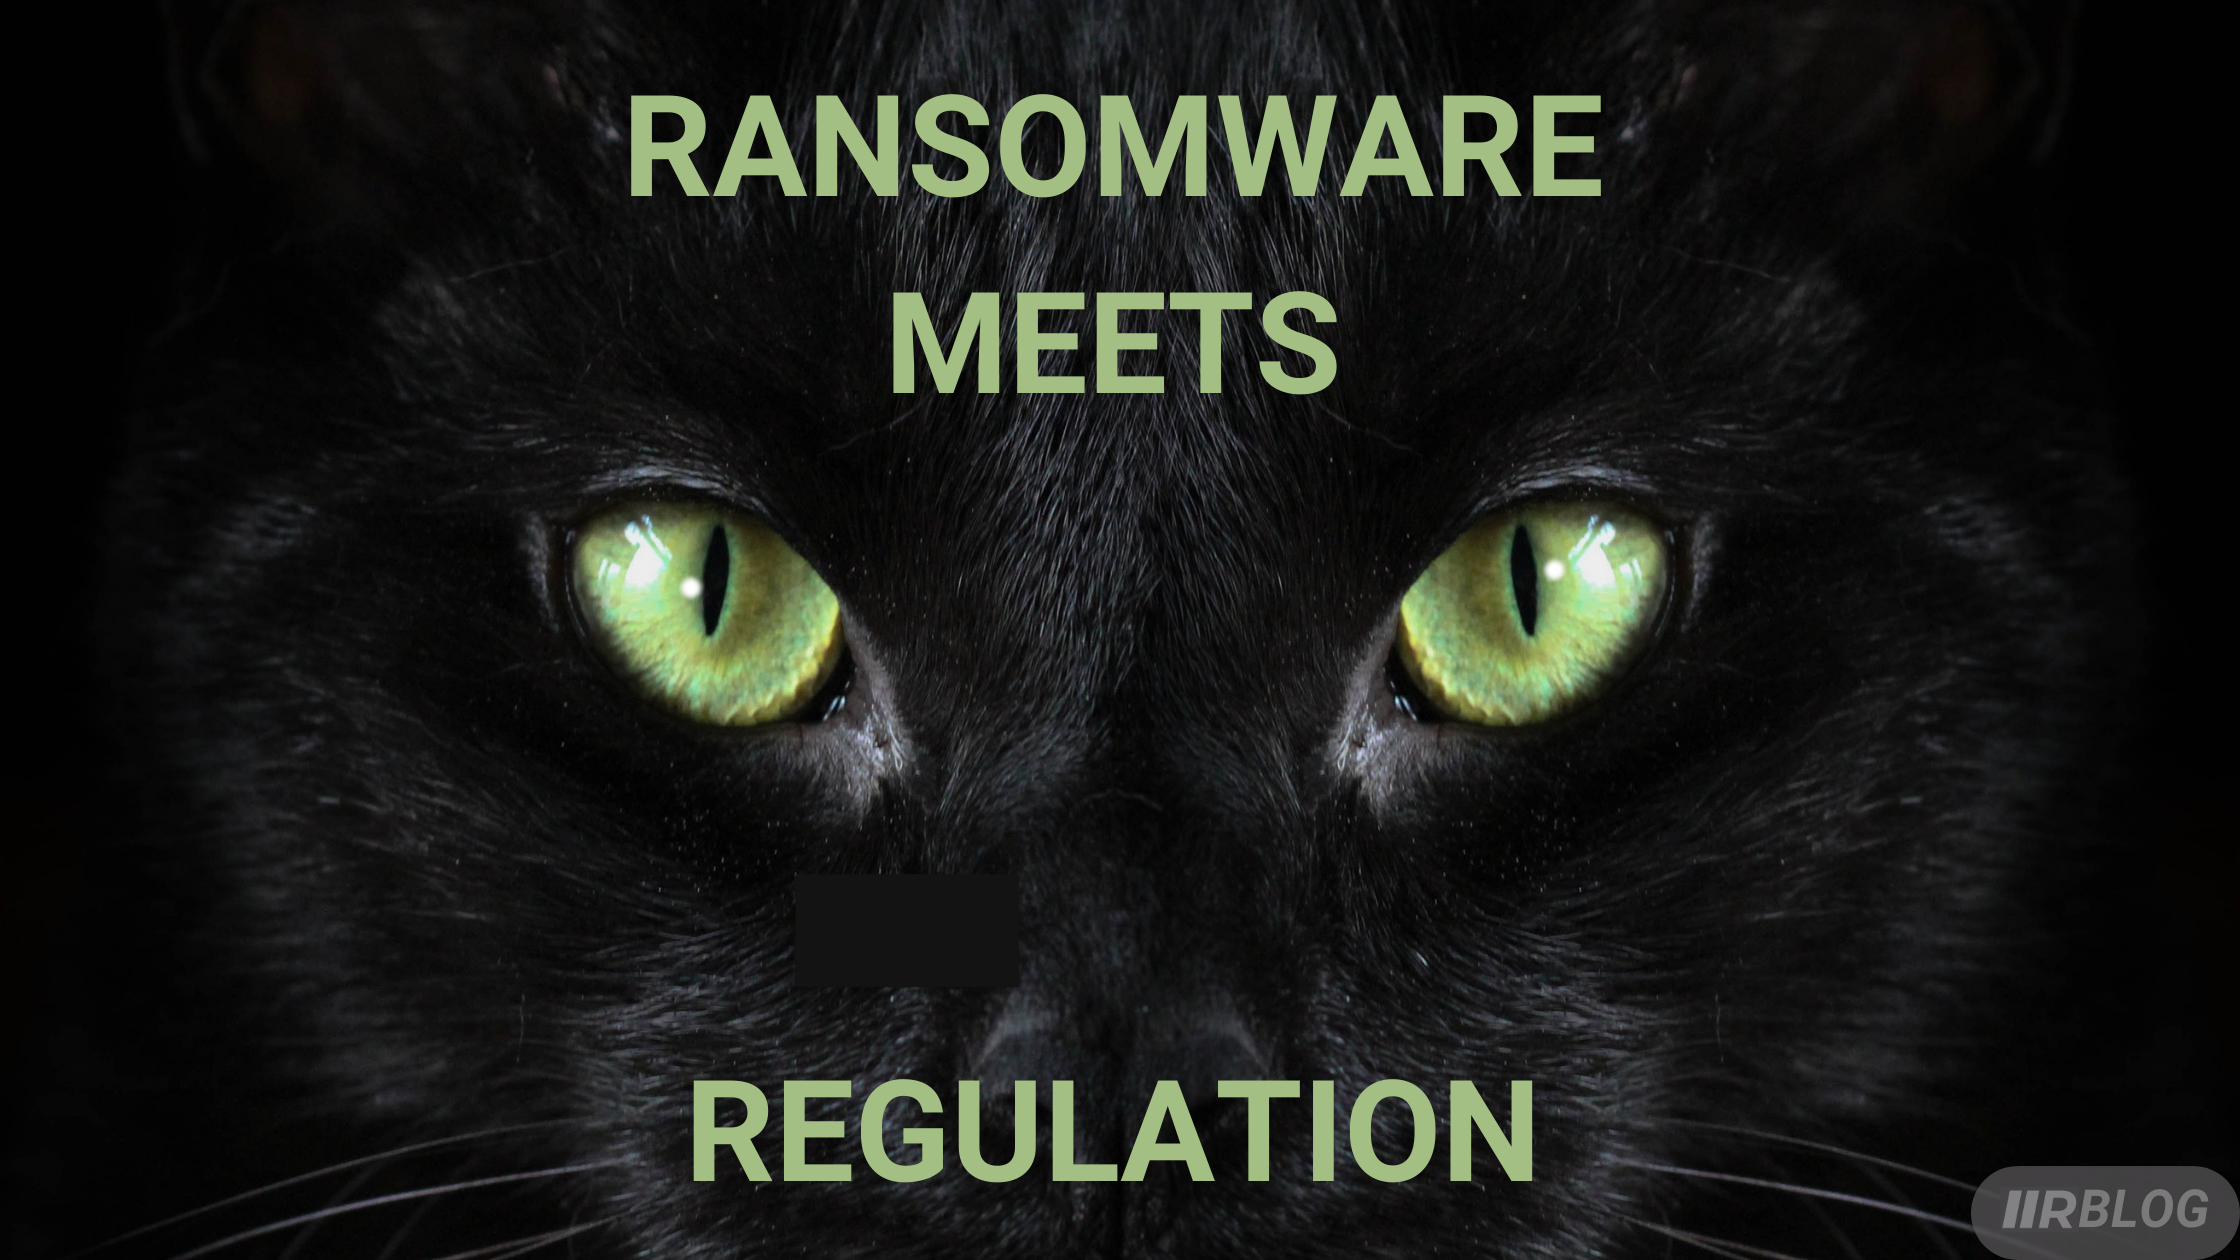 RANSOMWARE MEETS